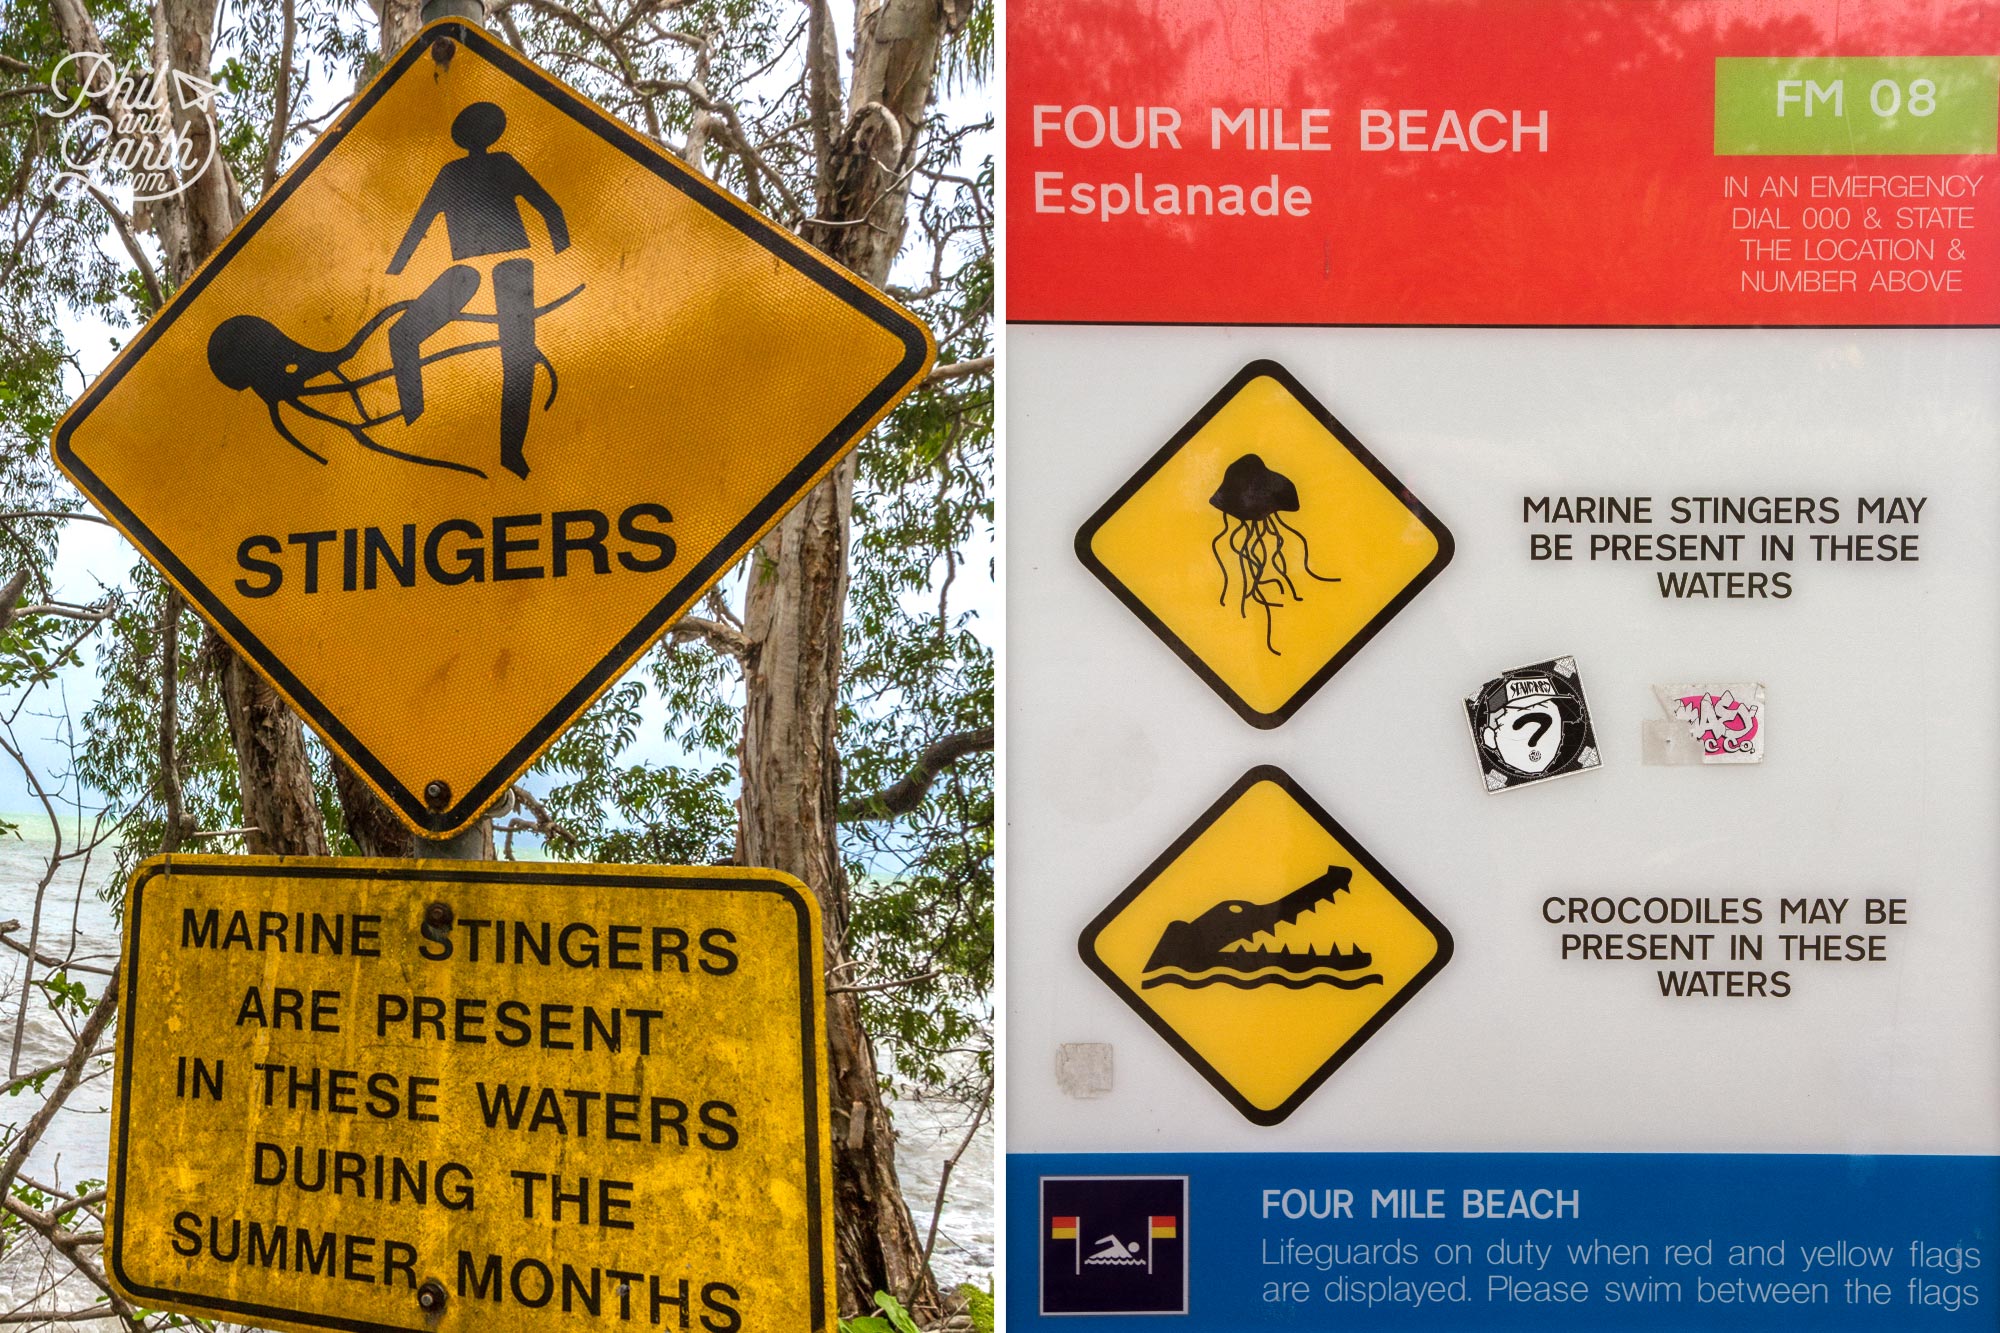 Pay attention to the warning signs for jelly fish and crocodiles in Port Douglas